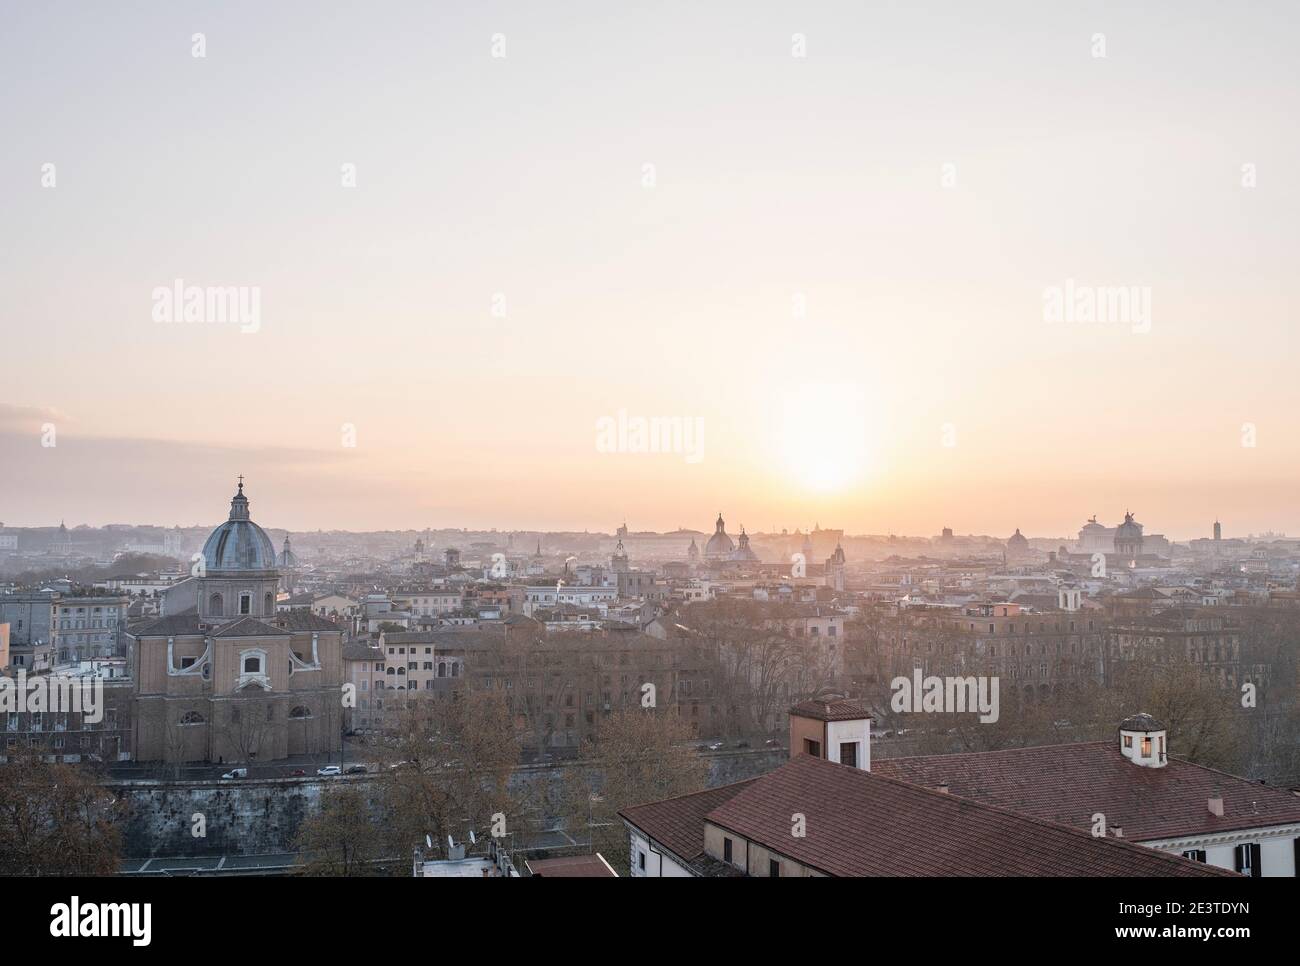 View down onto central Rome, Italy, from Trastevere, across the River Tiber, at sunrise. Stock Photo